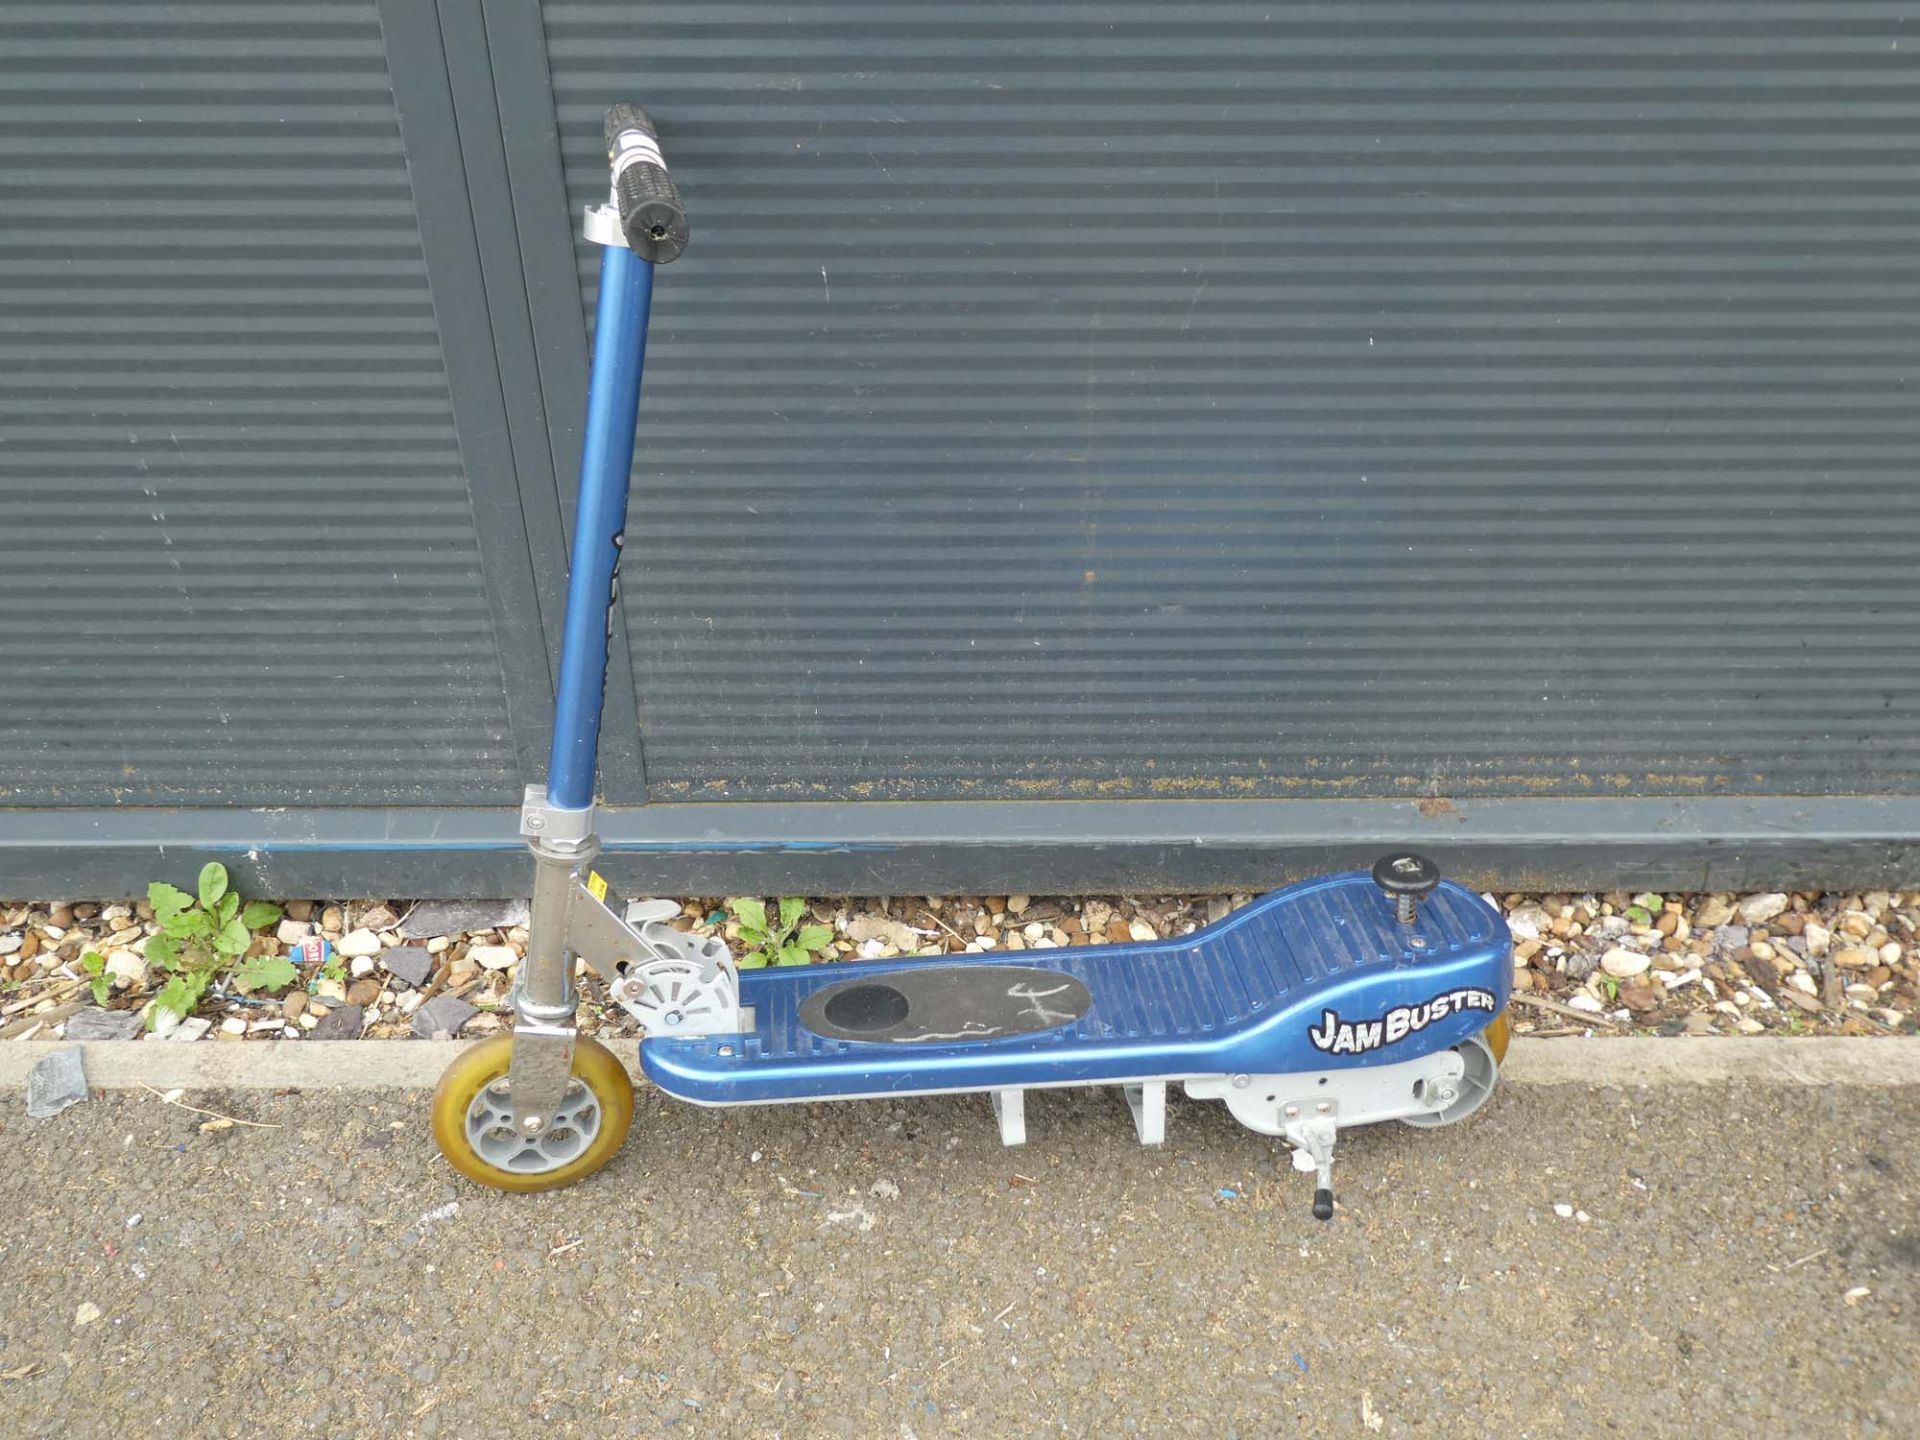 Blue Jambuster scooter